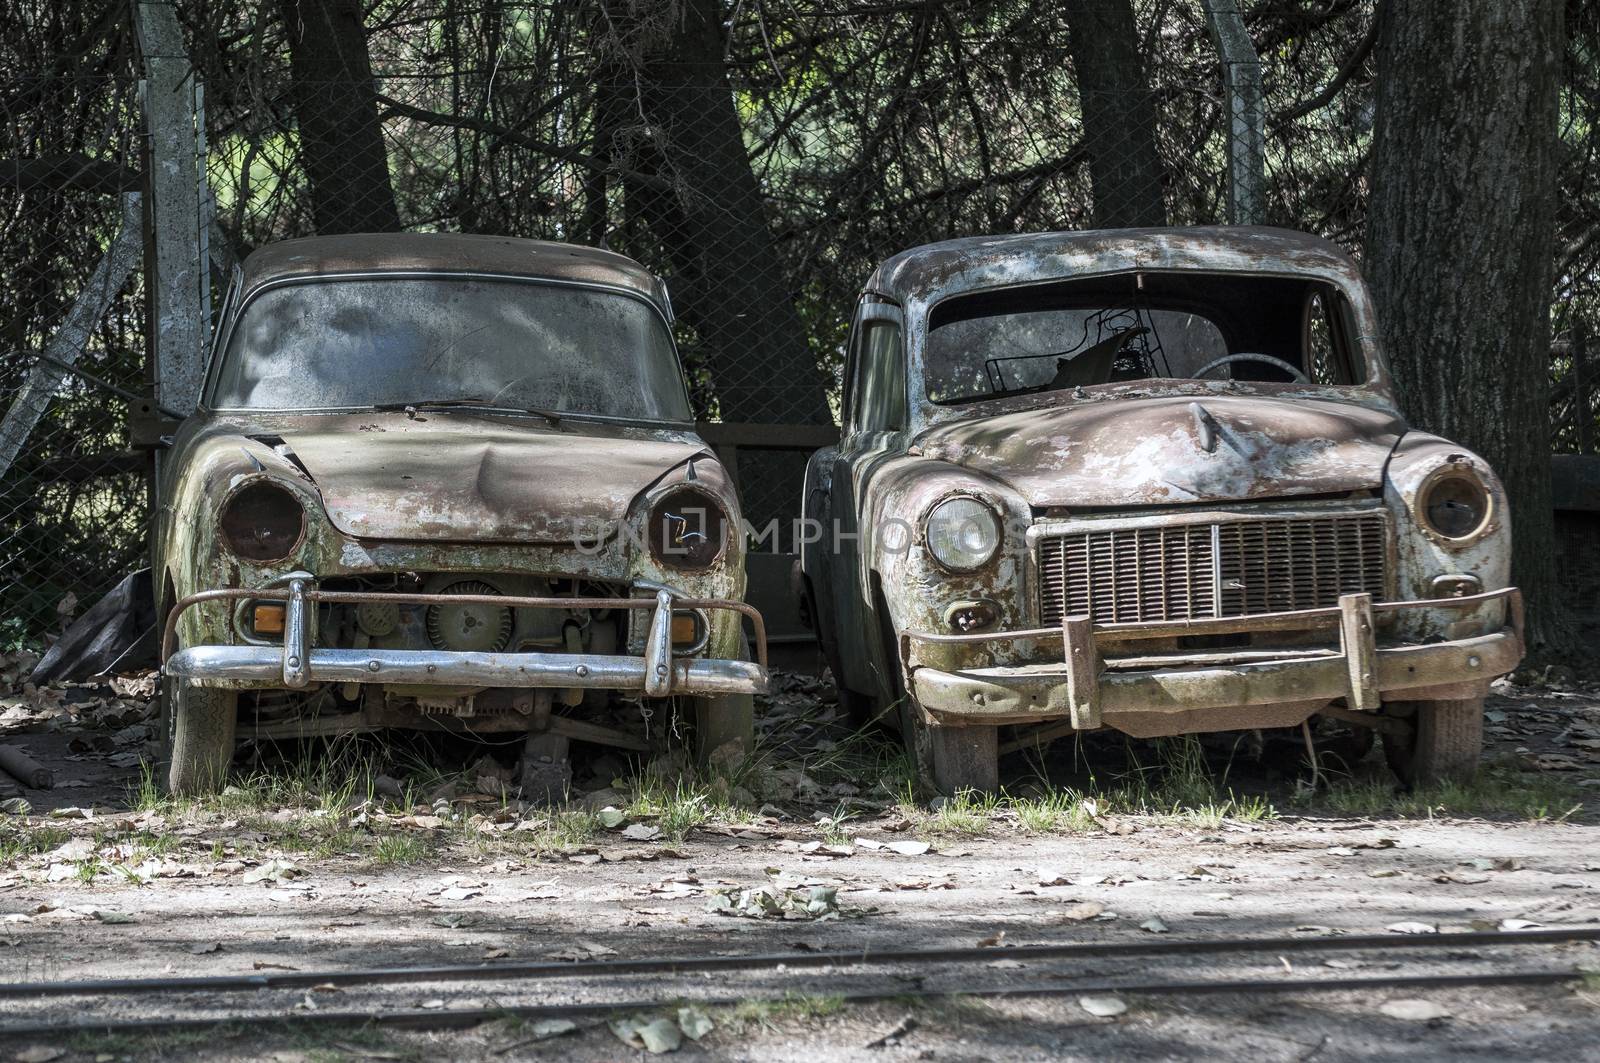 Stock image of two old, rusted, abandoned cars.